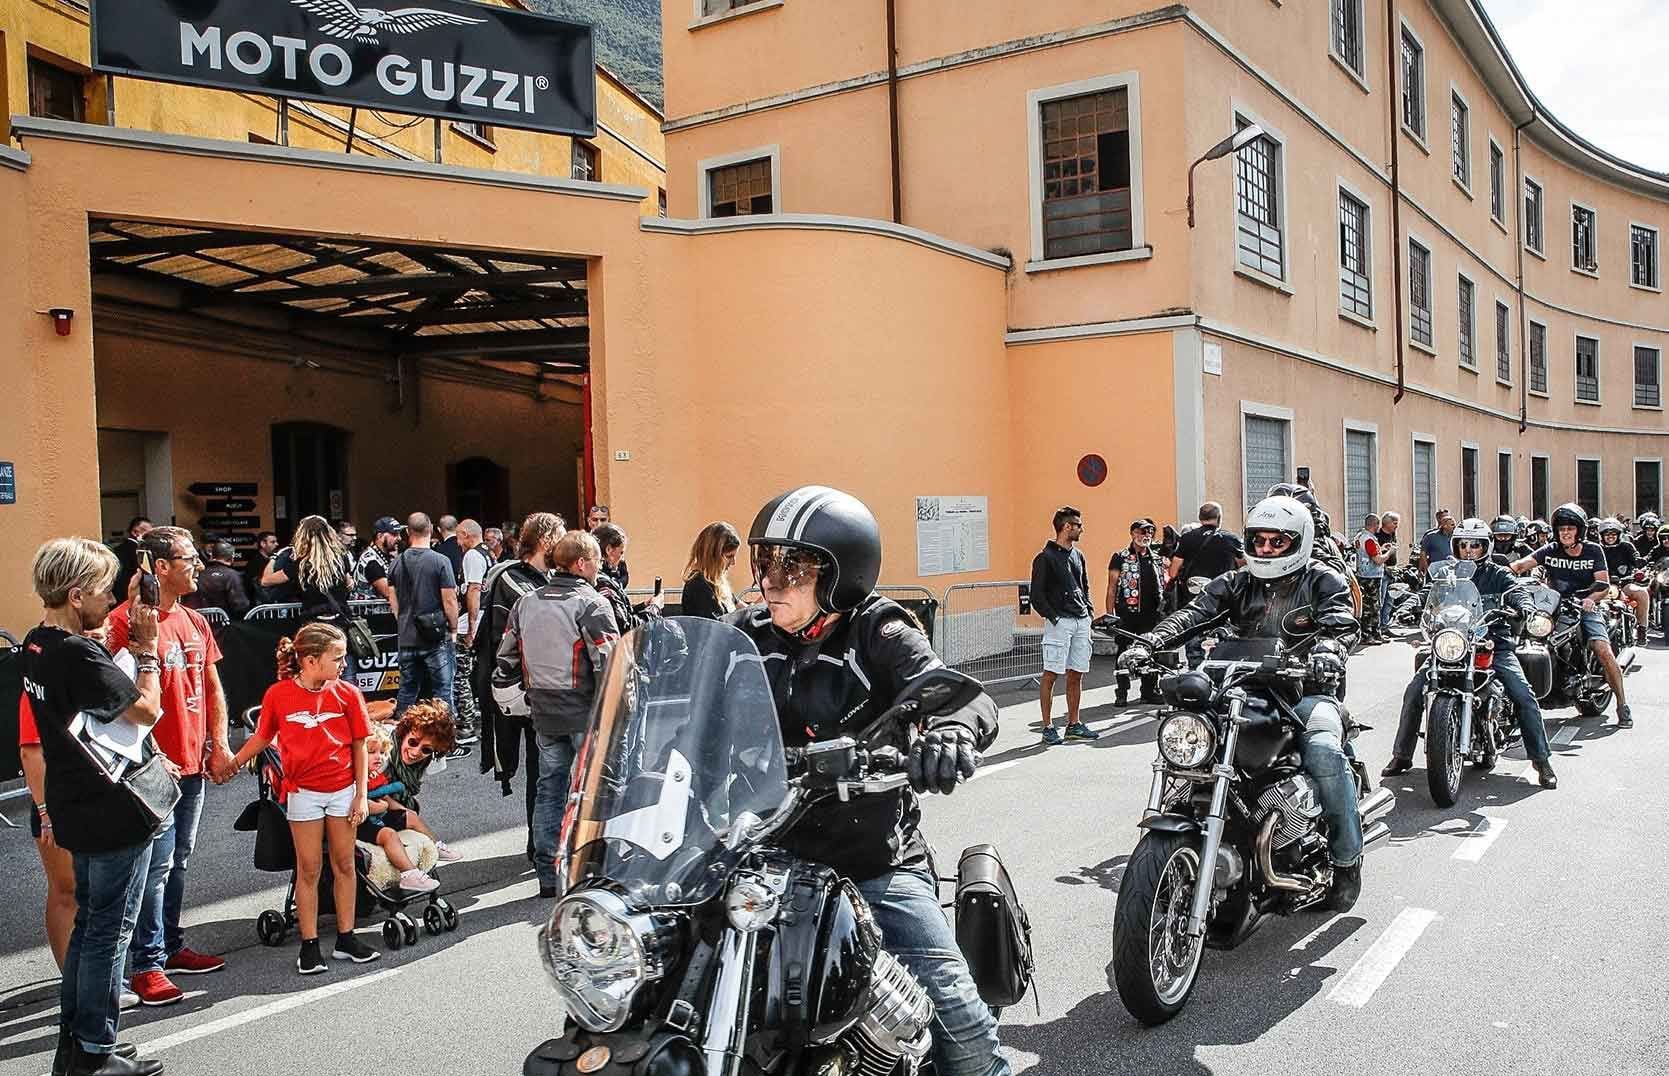 Thousands of Guzzi enthusiasts poured onto the streets of Mandello del Lario at this year’s Moto Guzzi World Days to celebrate the previously postponed 100th anniversary.